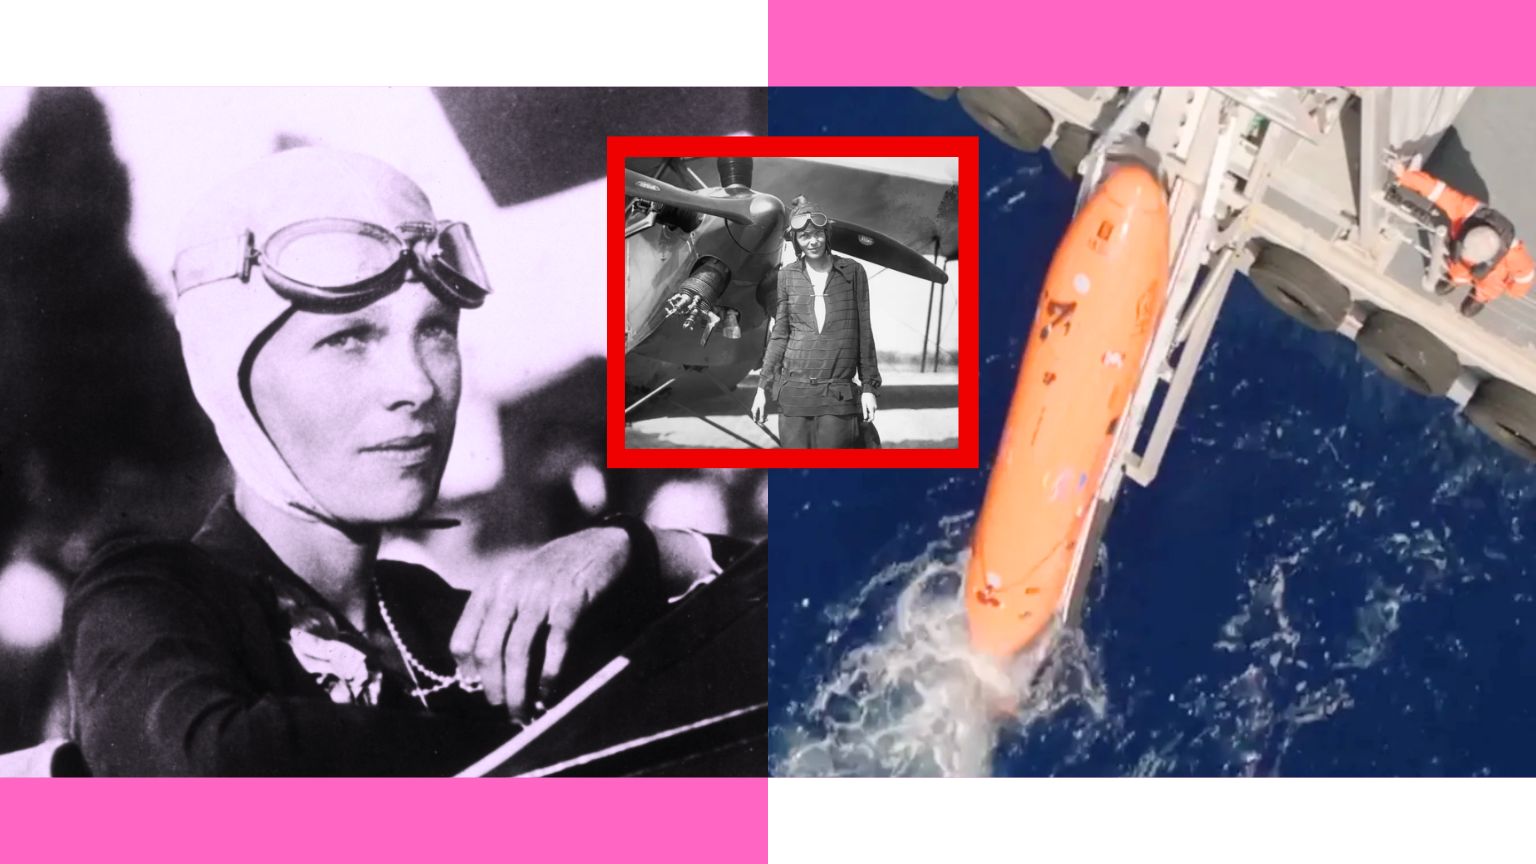 Locating Amelia Earhart’s Lost Plane 16,000 Feet Beneath the Ocean, 87 Years After Mysterious Disappearance